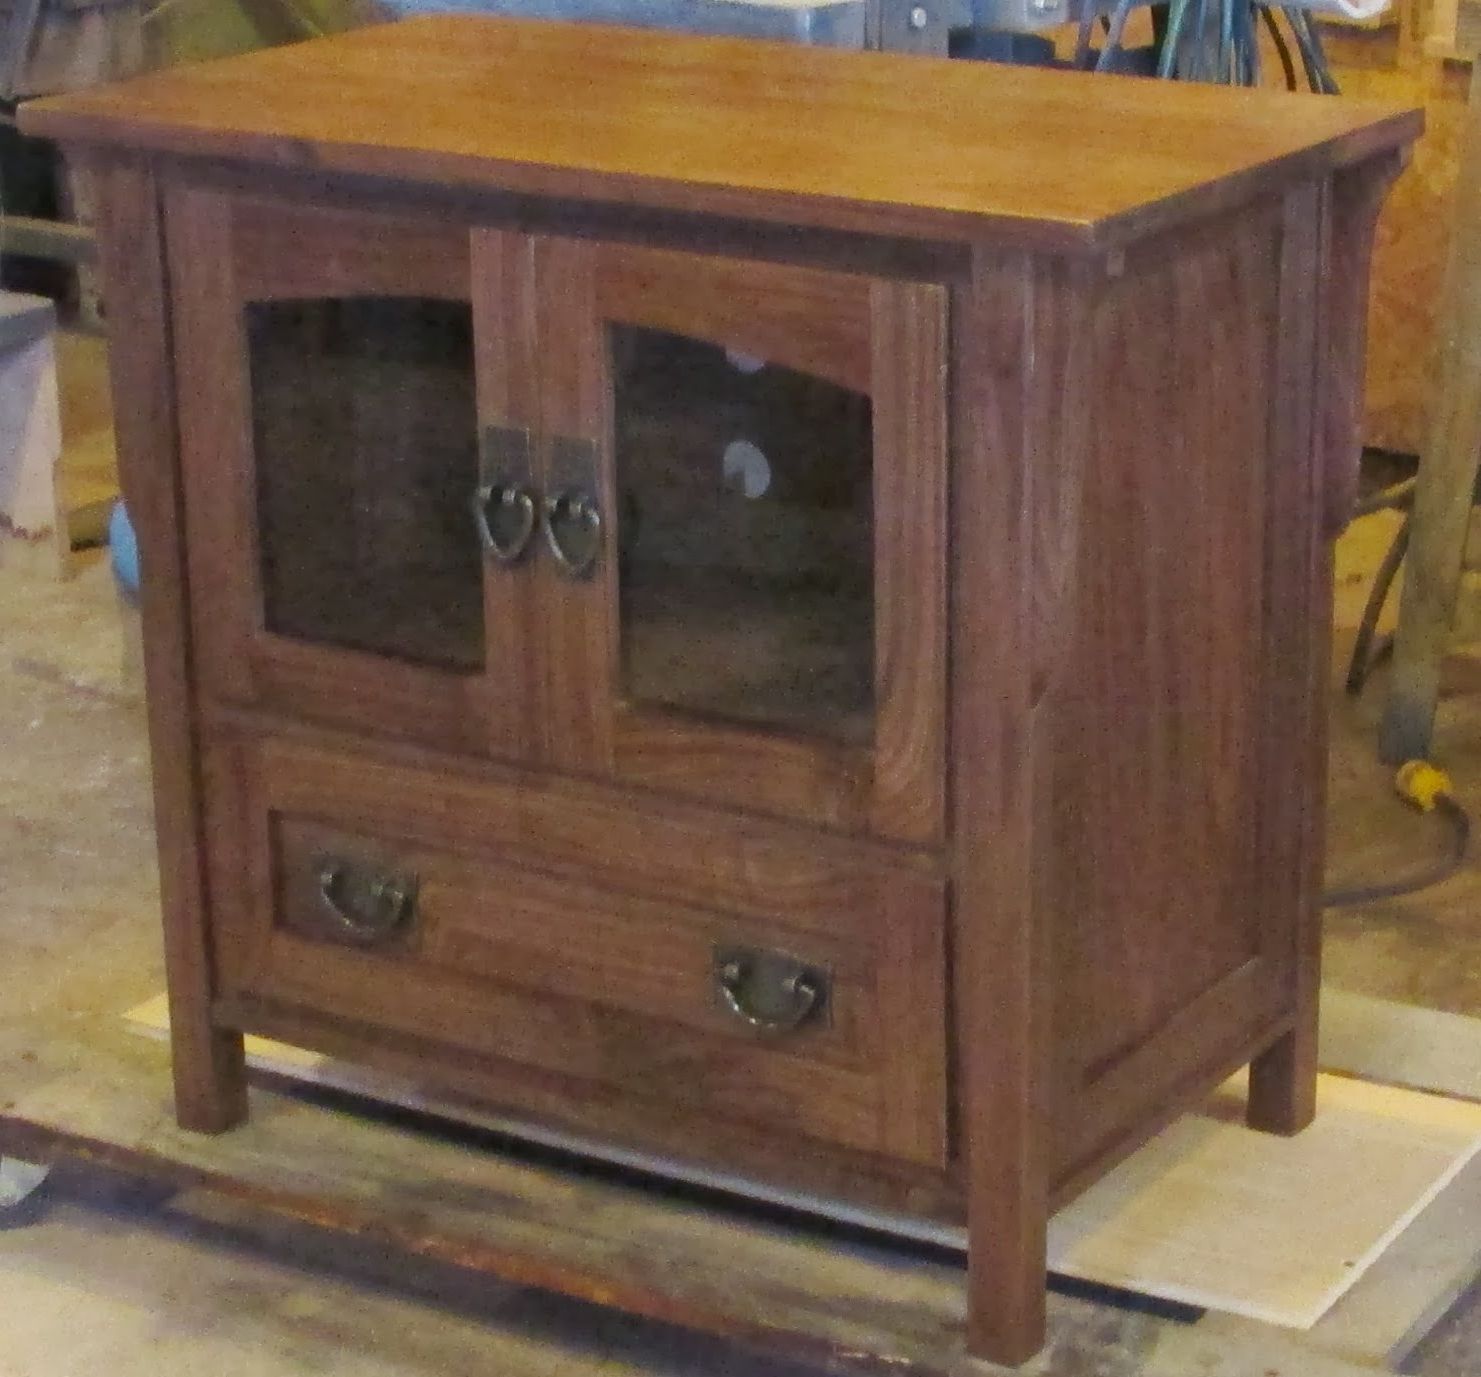 Tom Kies Woodworks: 36" Wide Walnut Tv Stand Throughout Deco Wide Tv Stands (View 13 of 20)